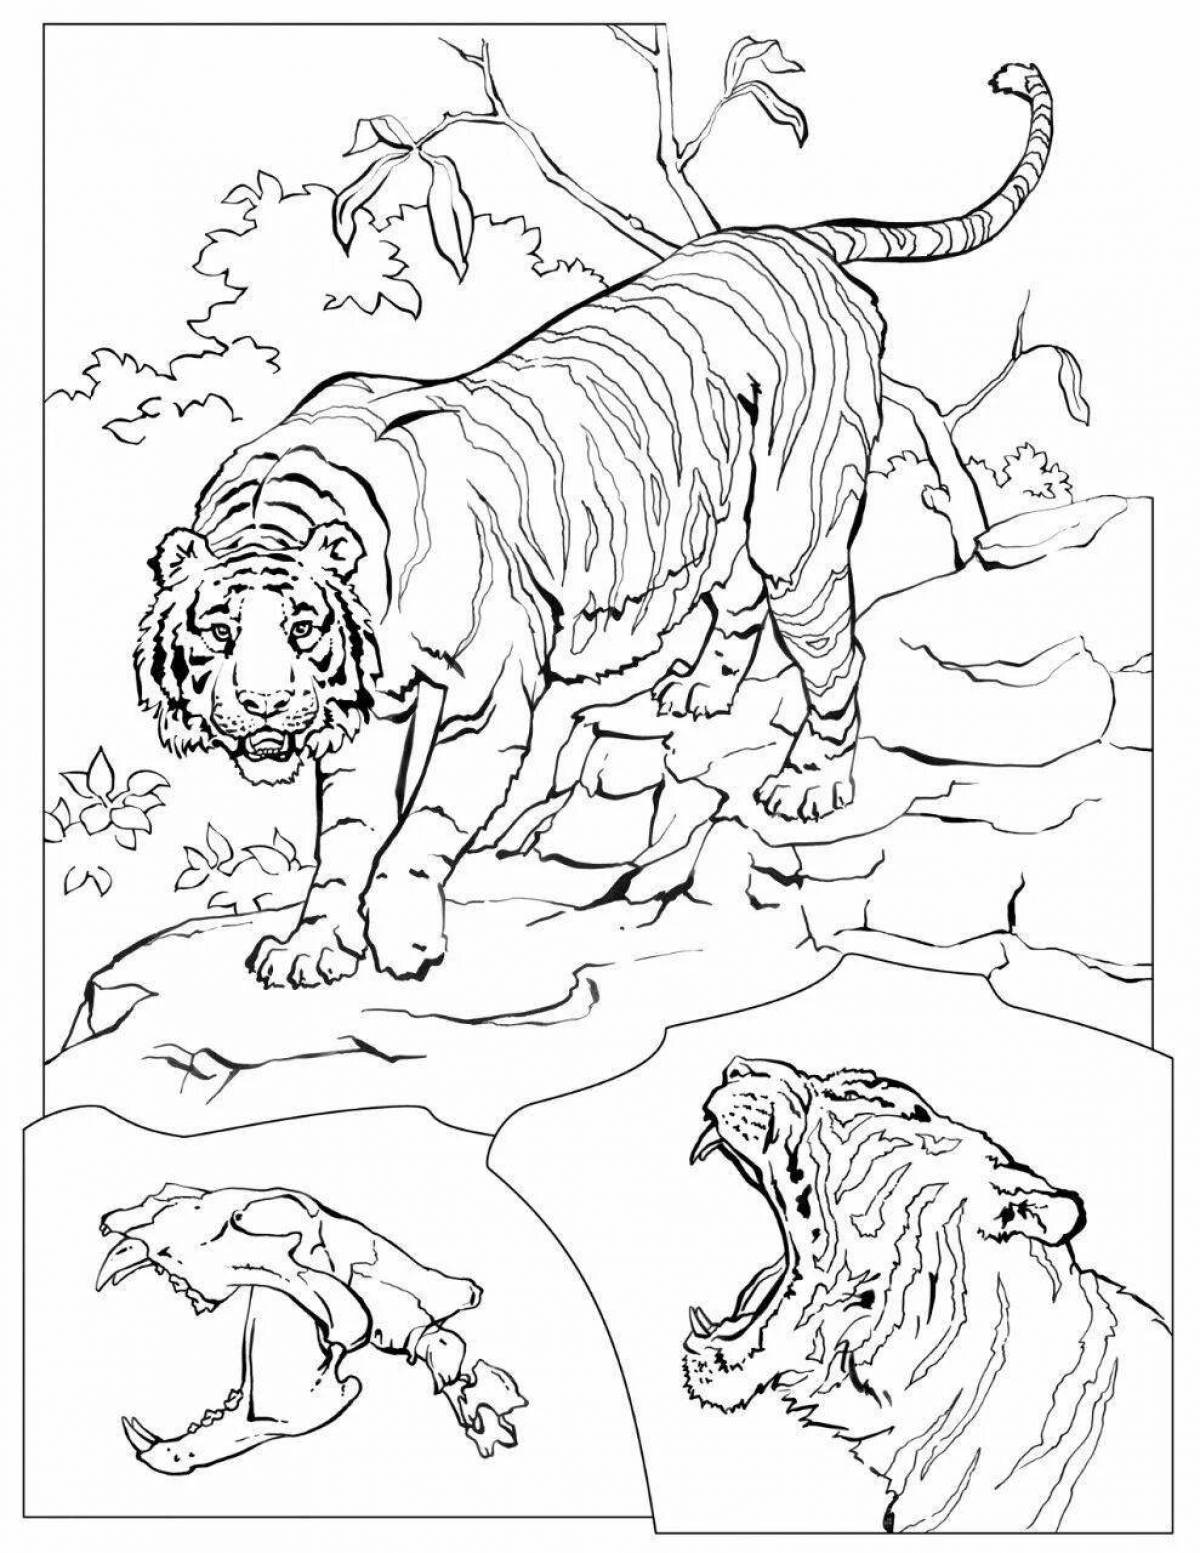 Coloring live tiger family